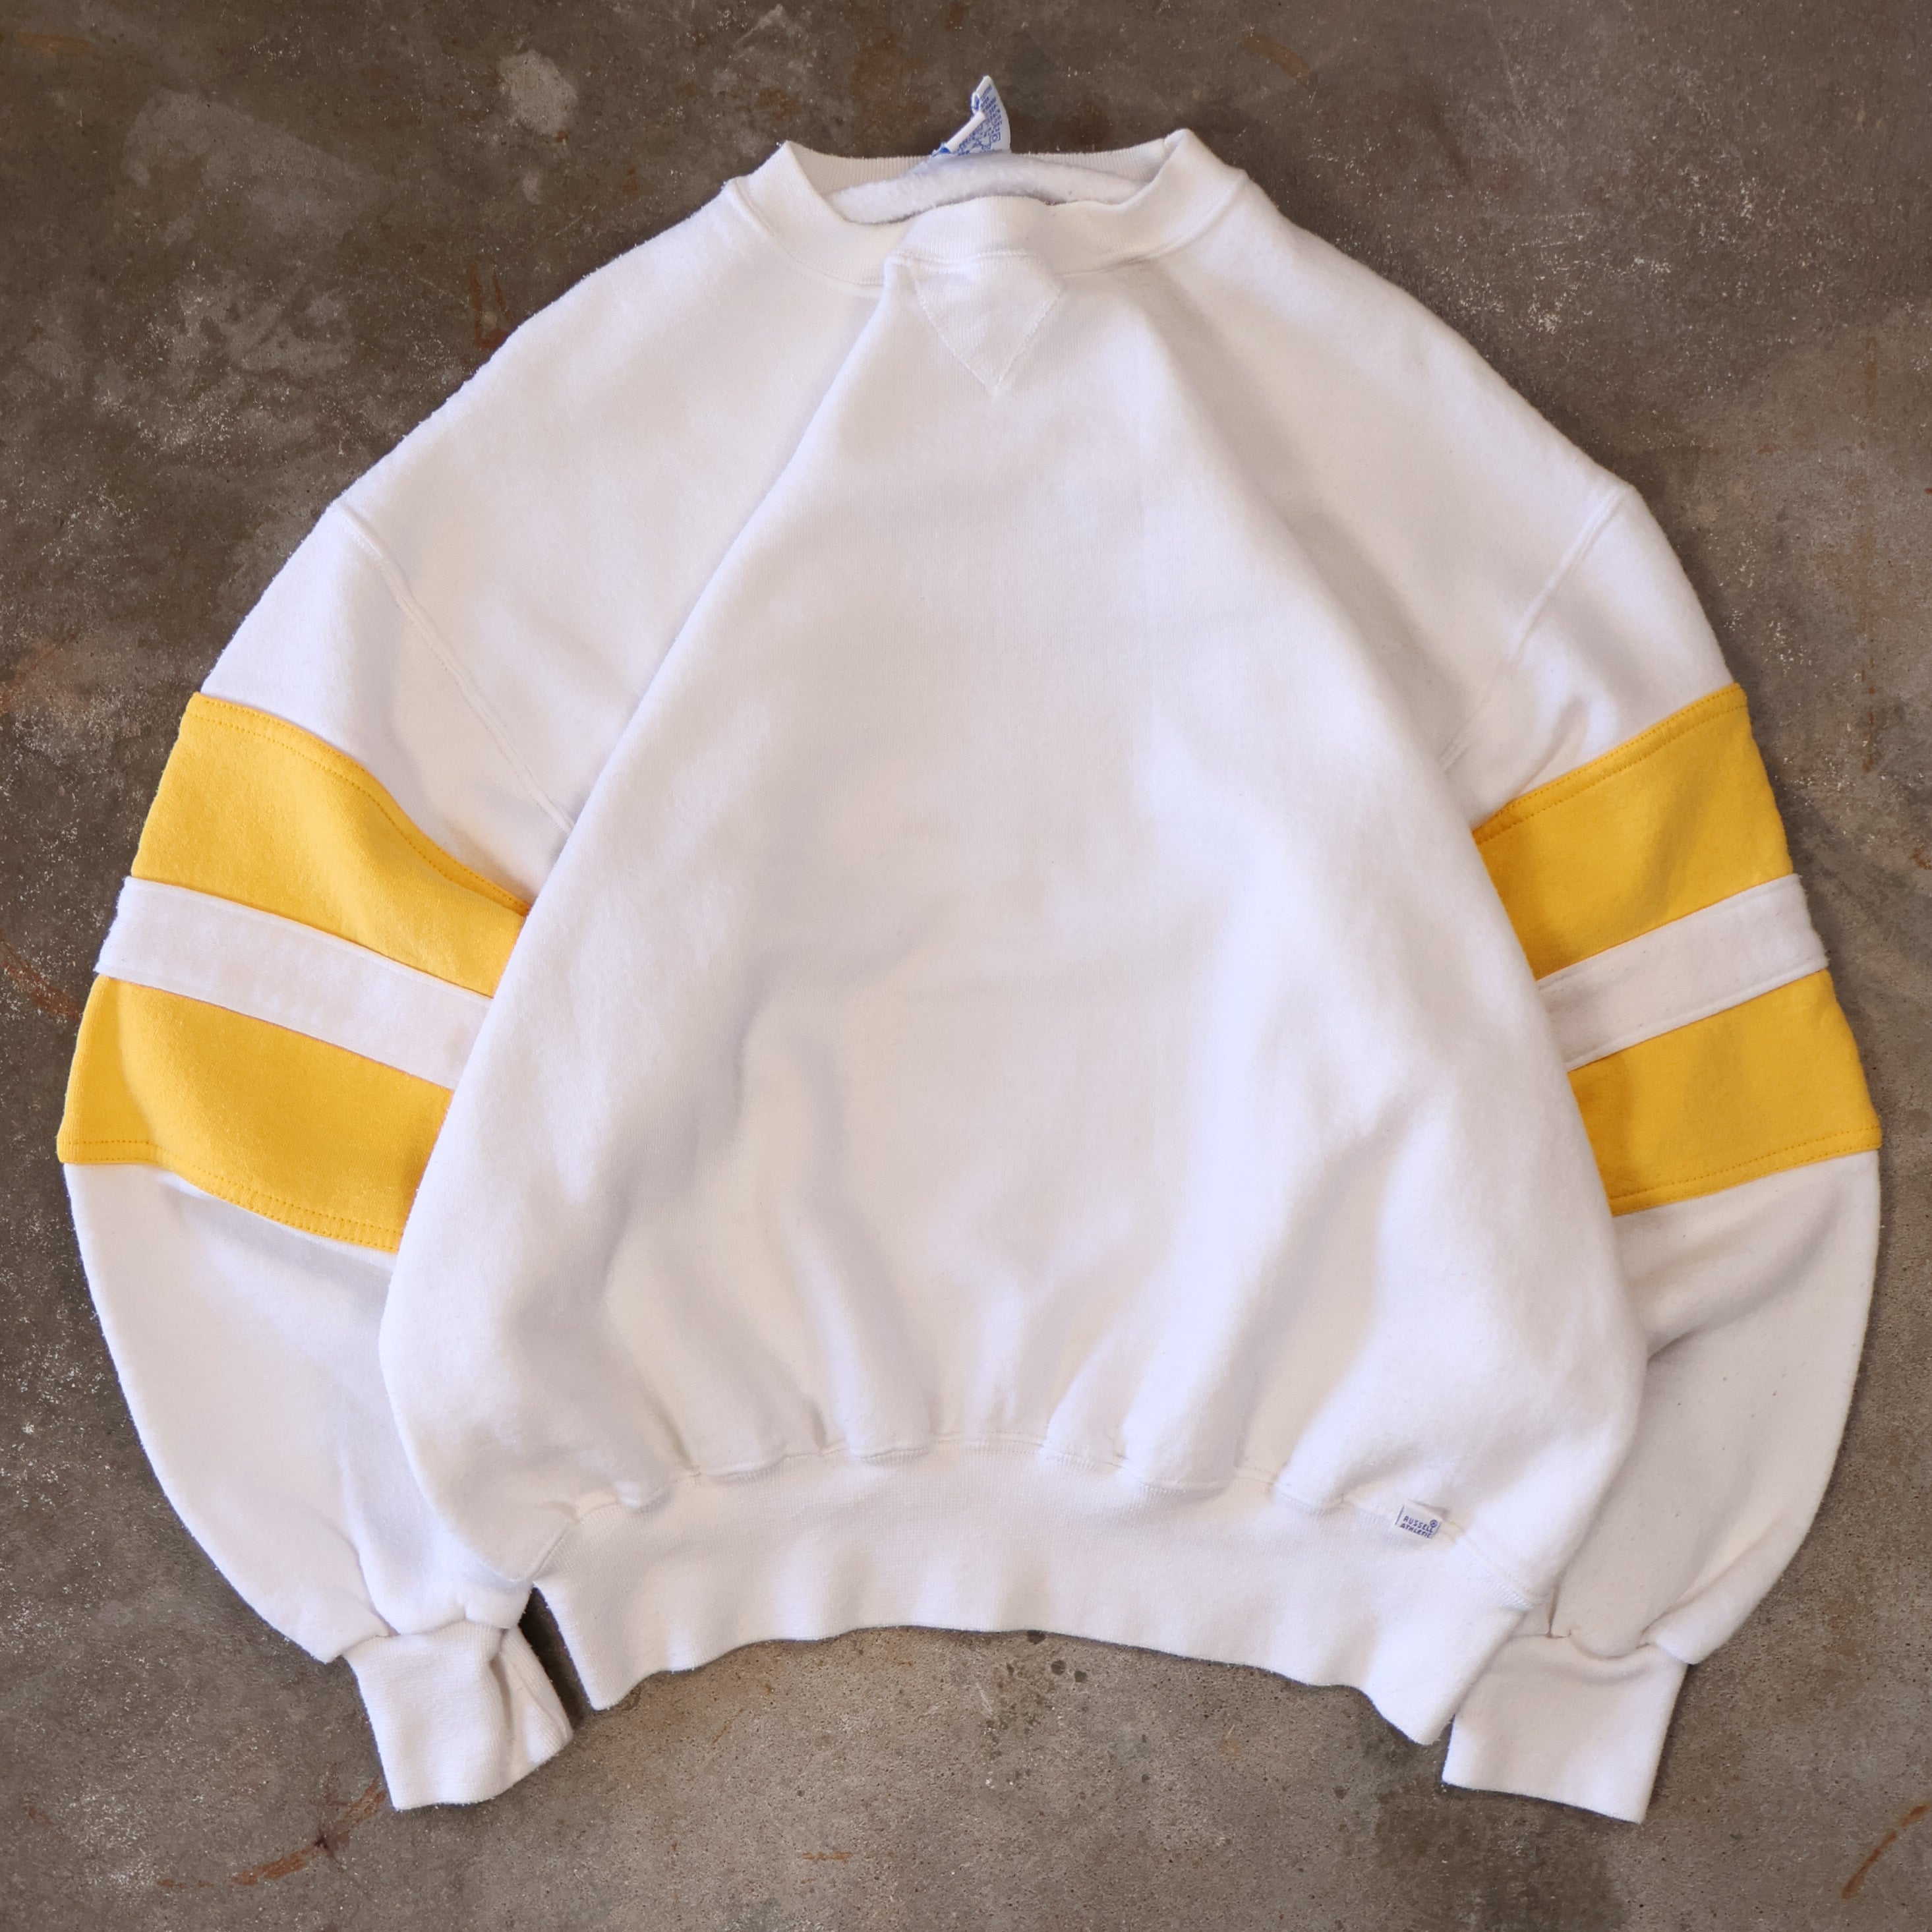 White Russell with Yellow Stripes Sweatshirt 90s (XL)